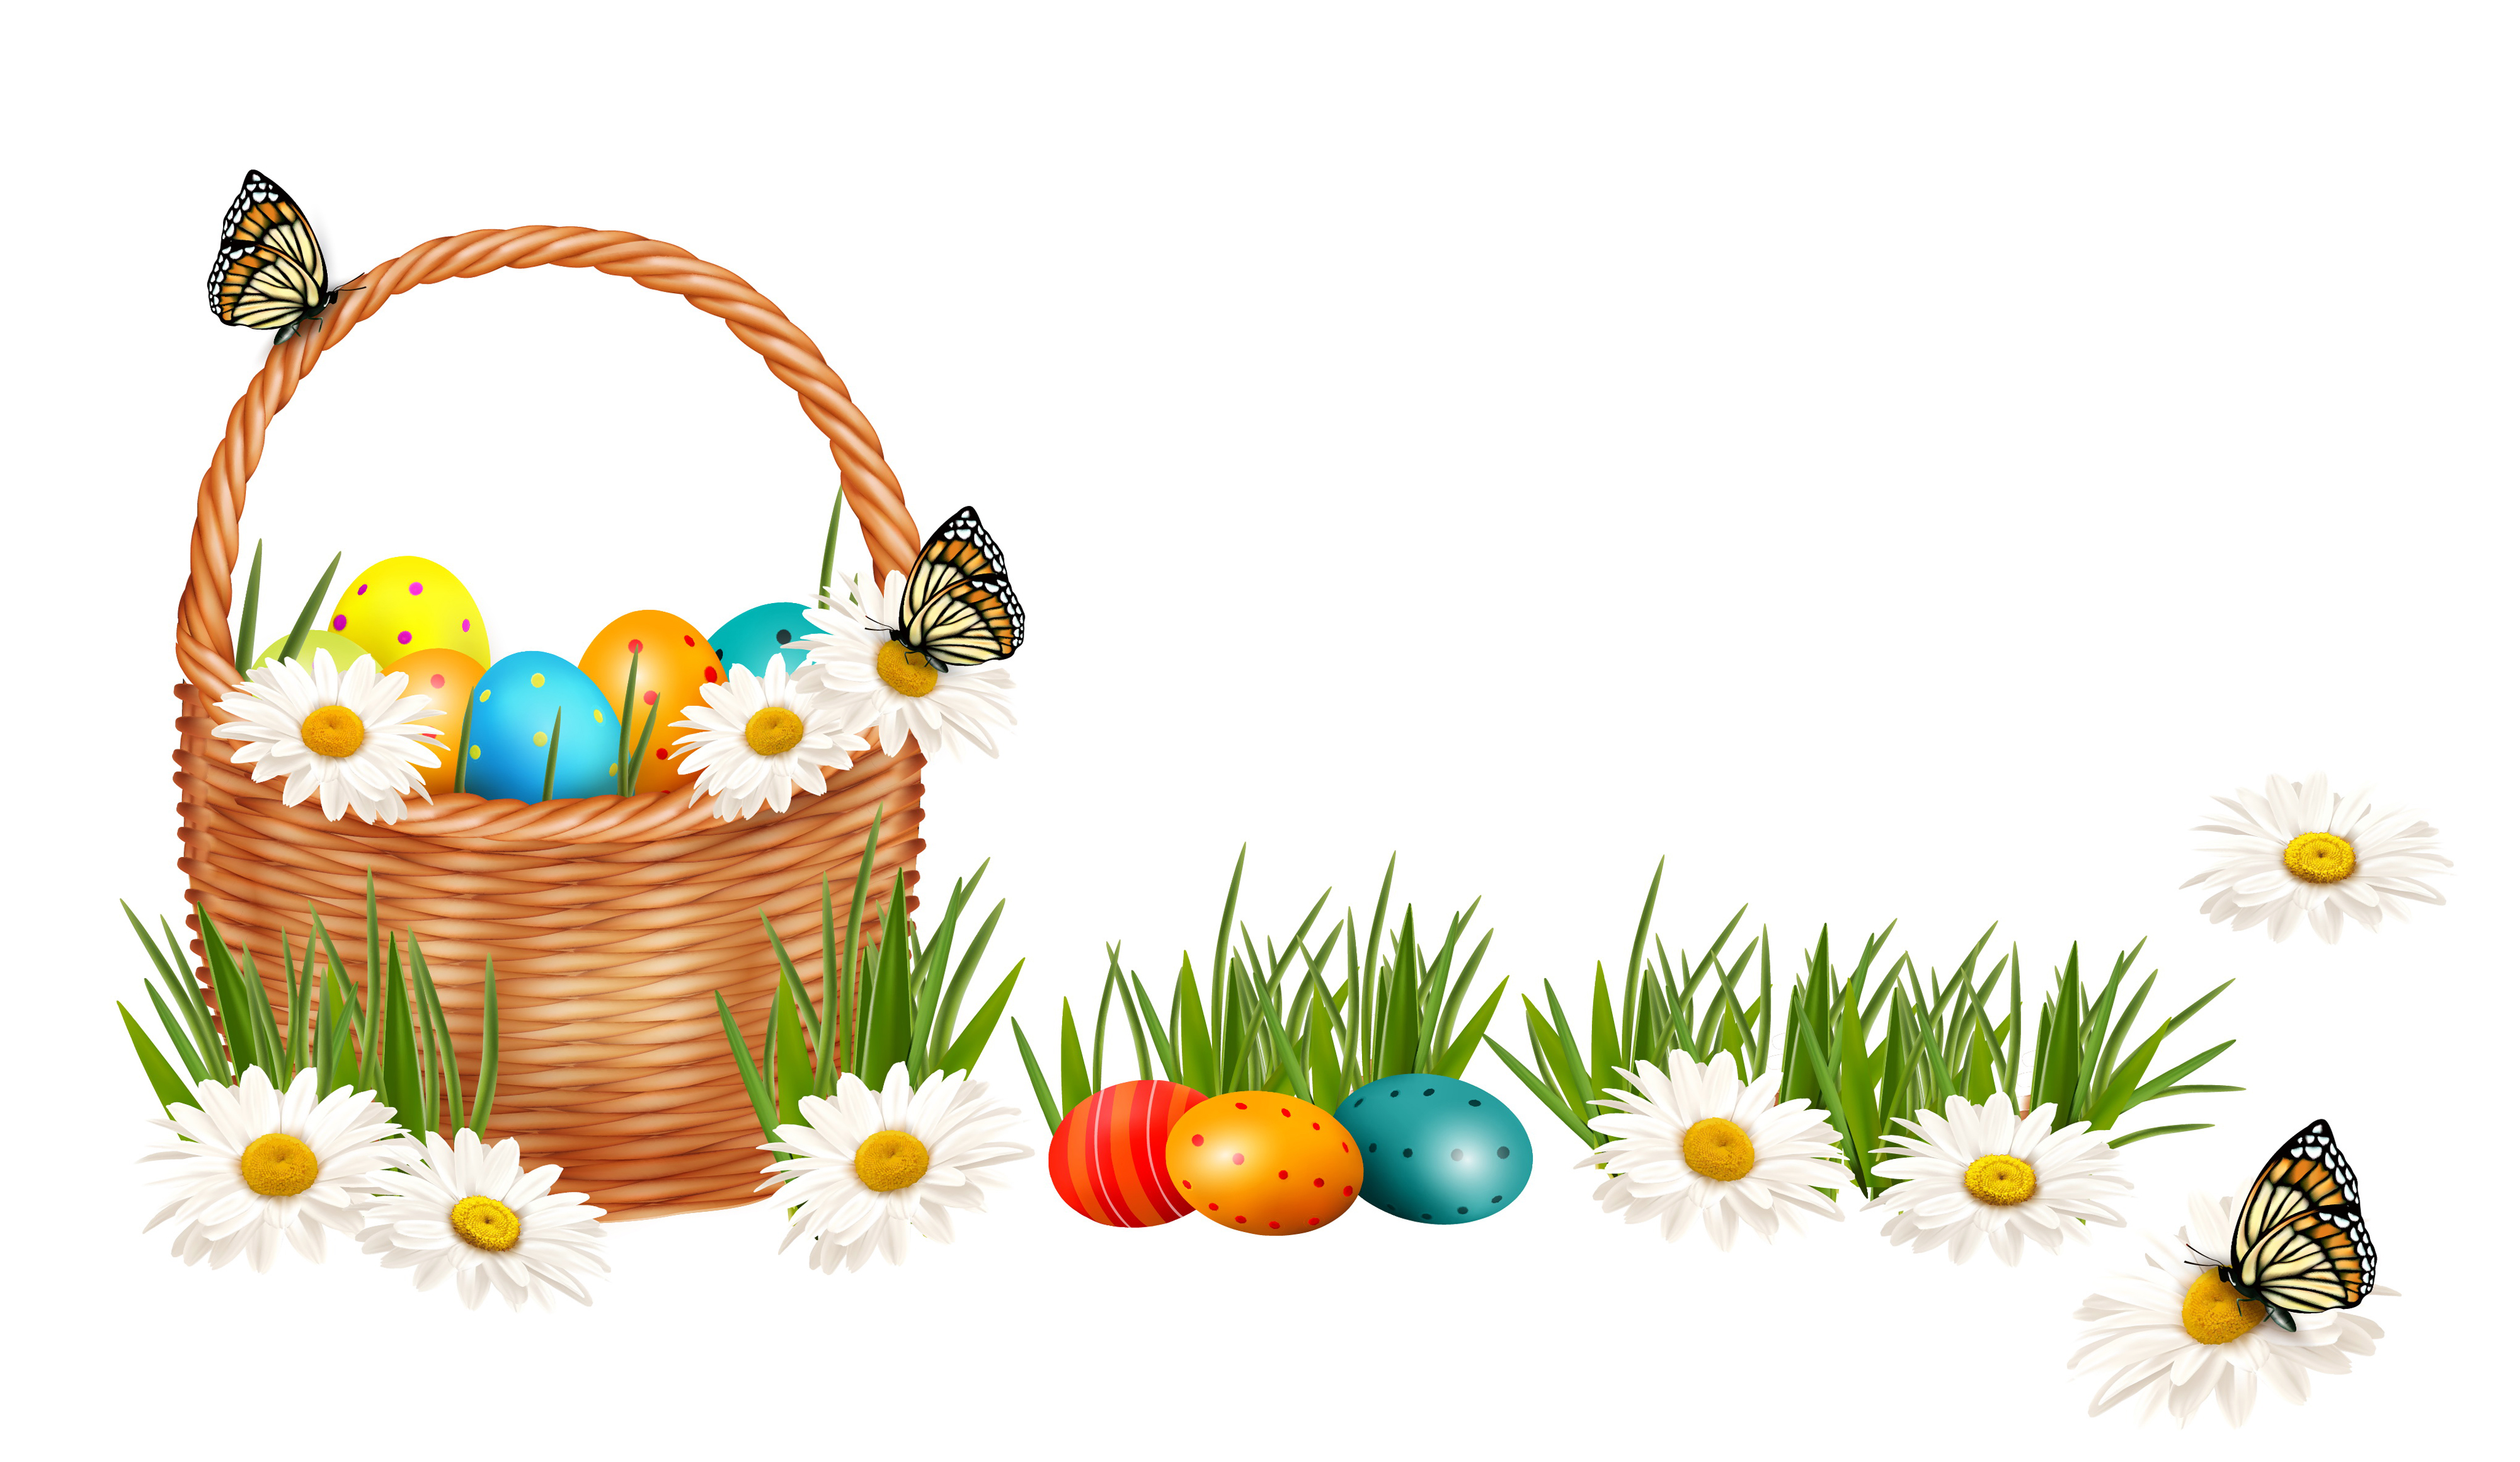 HD desktop wallpaper: Grass, Easter, Holiday, Butterfly, Colorful, Basket,  Spring, Daisy, Easter Egg download free picture #830014